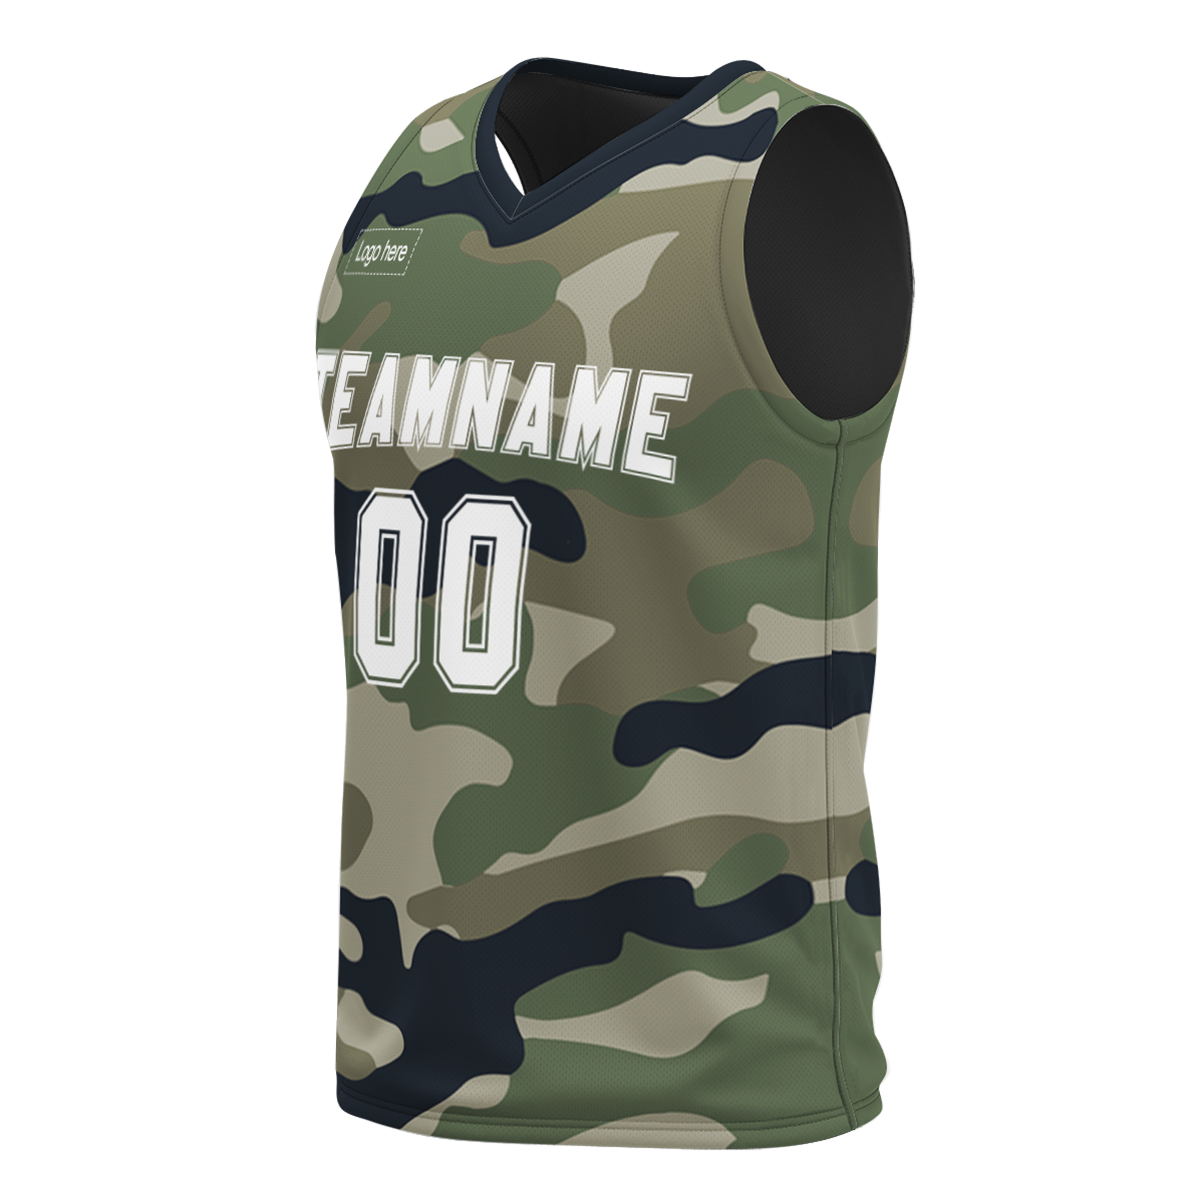 customized-basketball-uniforms-personalized-design-printing-sport-clothes-summer-basketball-jerseys-for-men-at-cj-pod-5